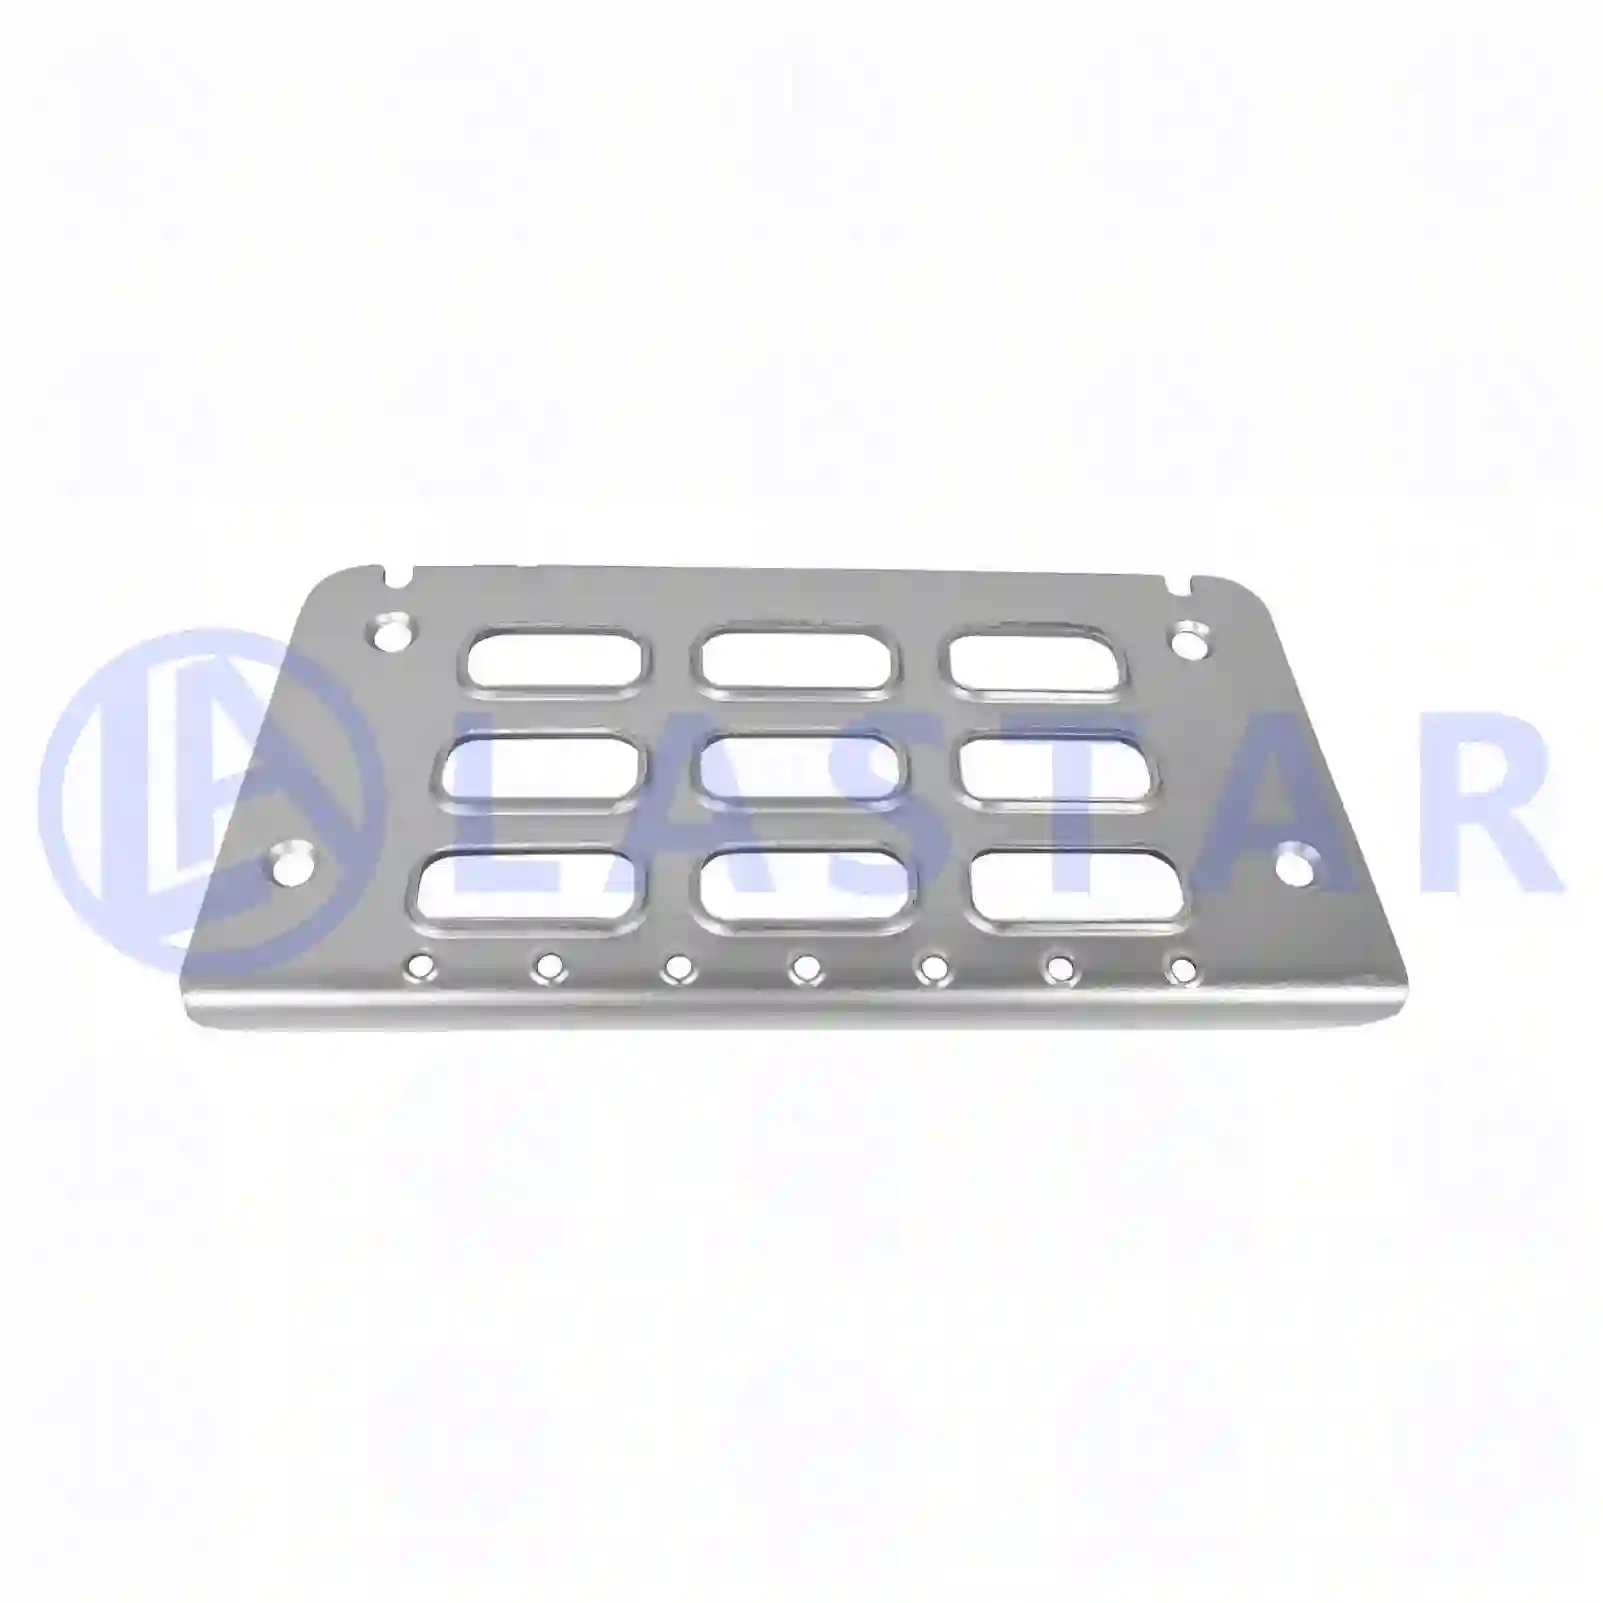 Step, 77721095, 1063726, ZG61126-0008 ||  77721095 Lastar Spare Part | Truck Spare Parts, Auotomotive Spare Parts Step, 77721095, 1063726, ZG61126-0008 ||  77721095 Lastar Spare Part | Truck Spare Parts, Auotomotive Spare Parts